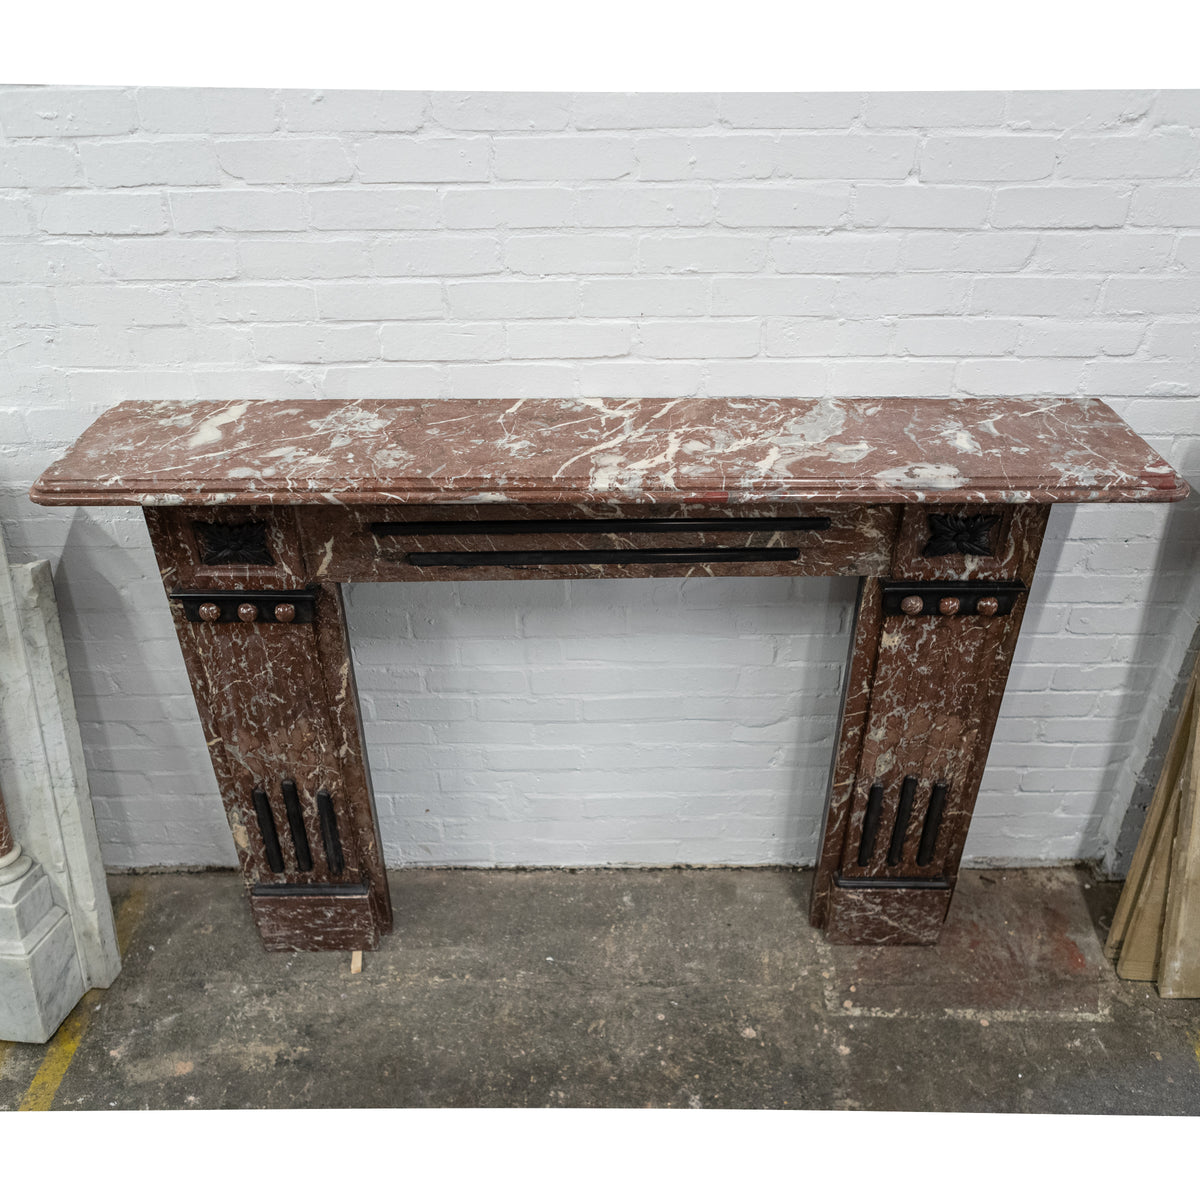 Antique Edwardian Rouge Royal Red Marble Fireplace | The Architectural Forum